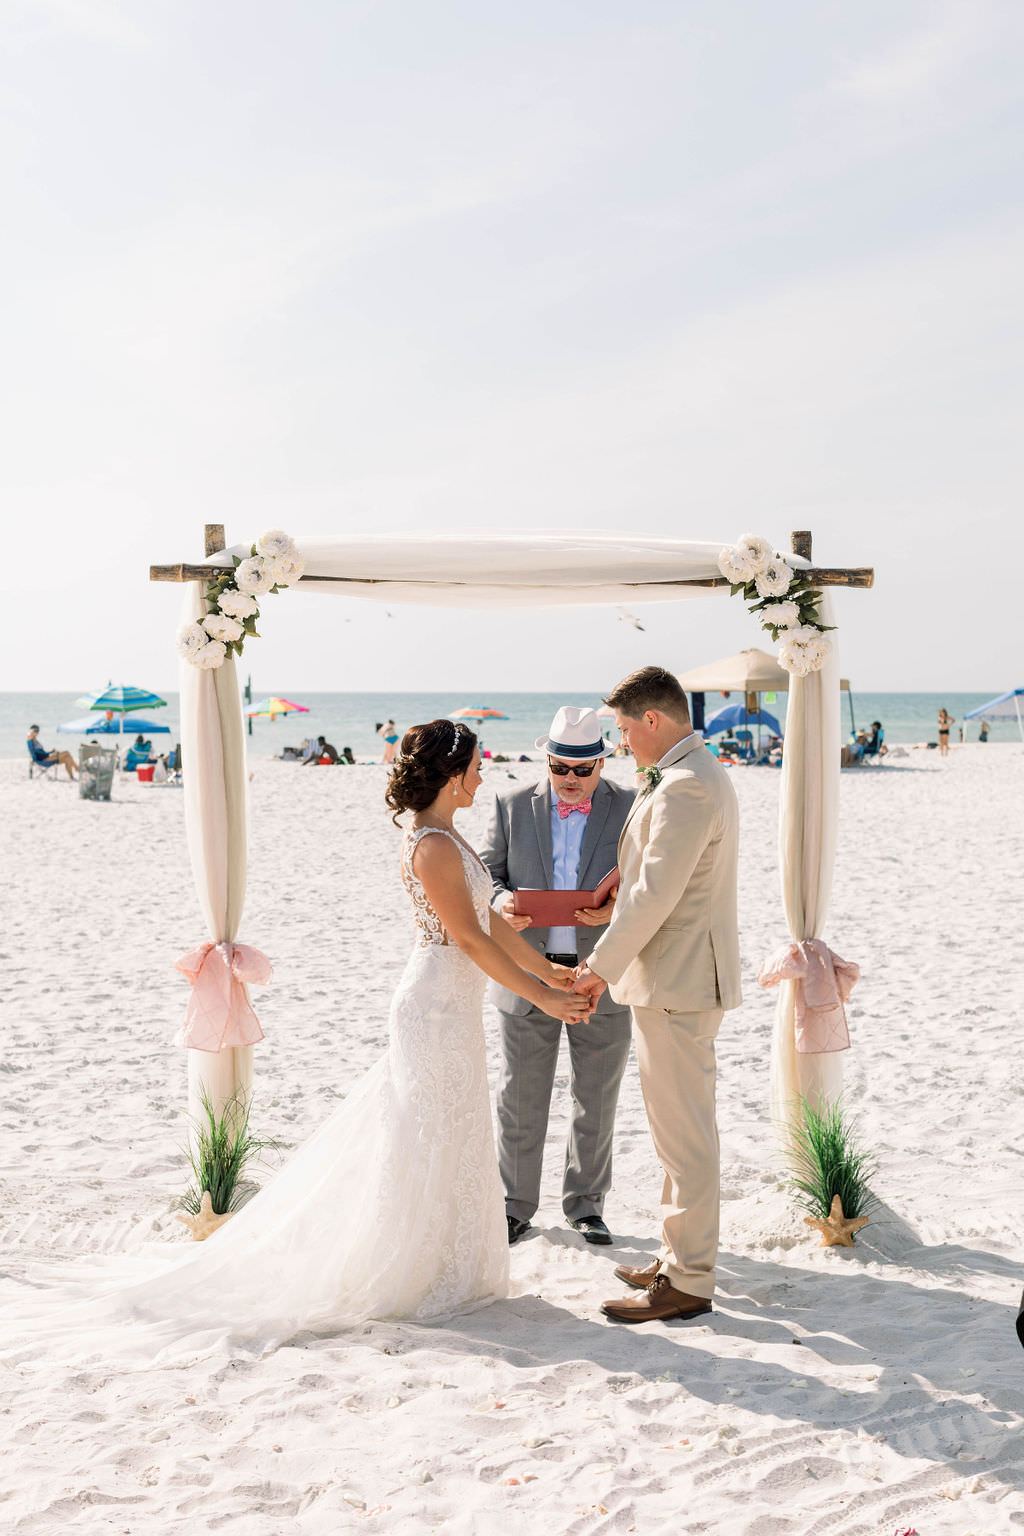 Florida Bride and Groom Exchanging Vows During Clearwater Beach Wedding Ceremony | Planner Gulf Beach Weddings